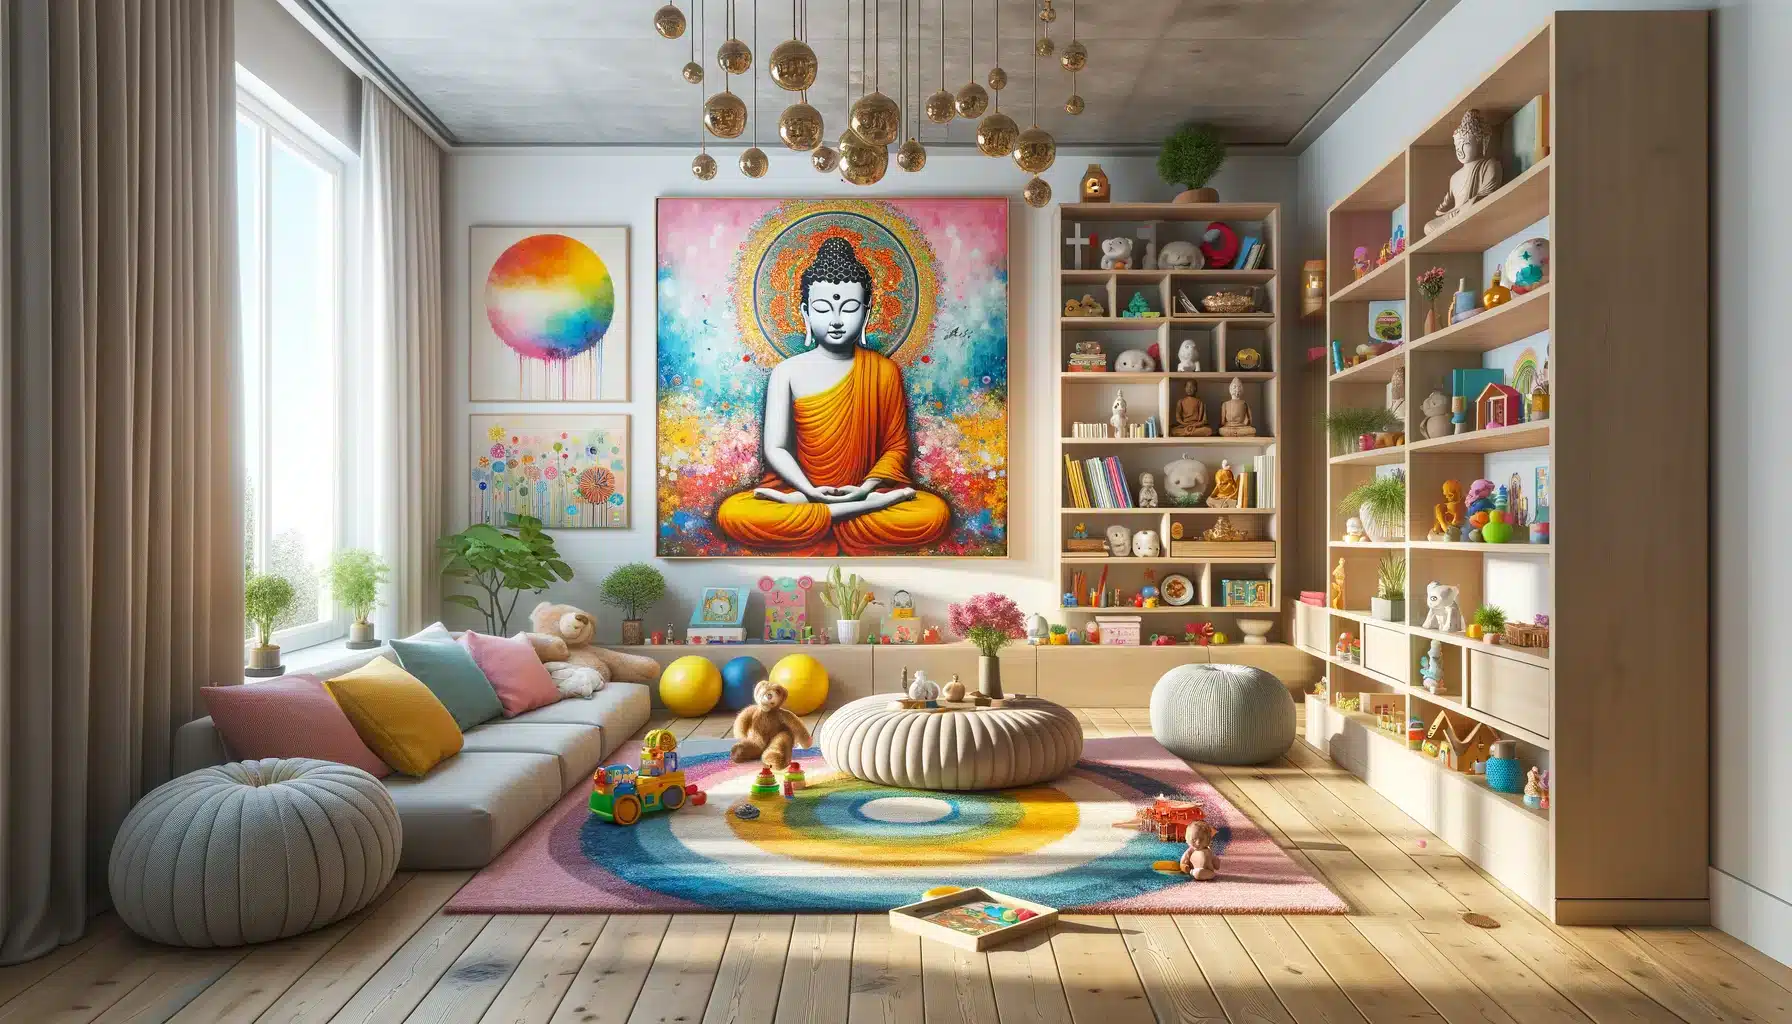 How to Personalize Buddha Decor in Children's Rooms for a Calm Space